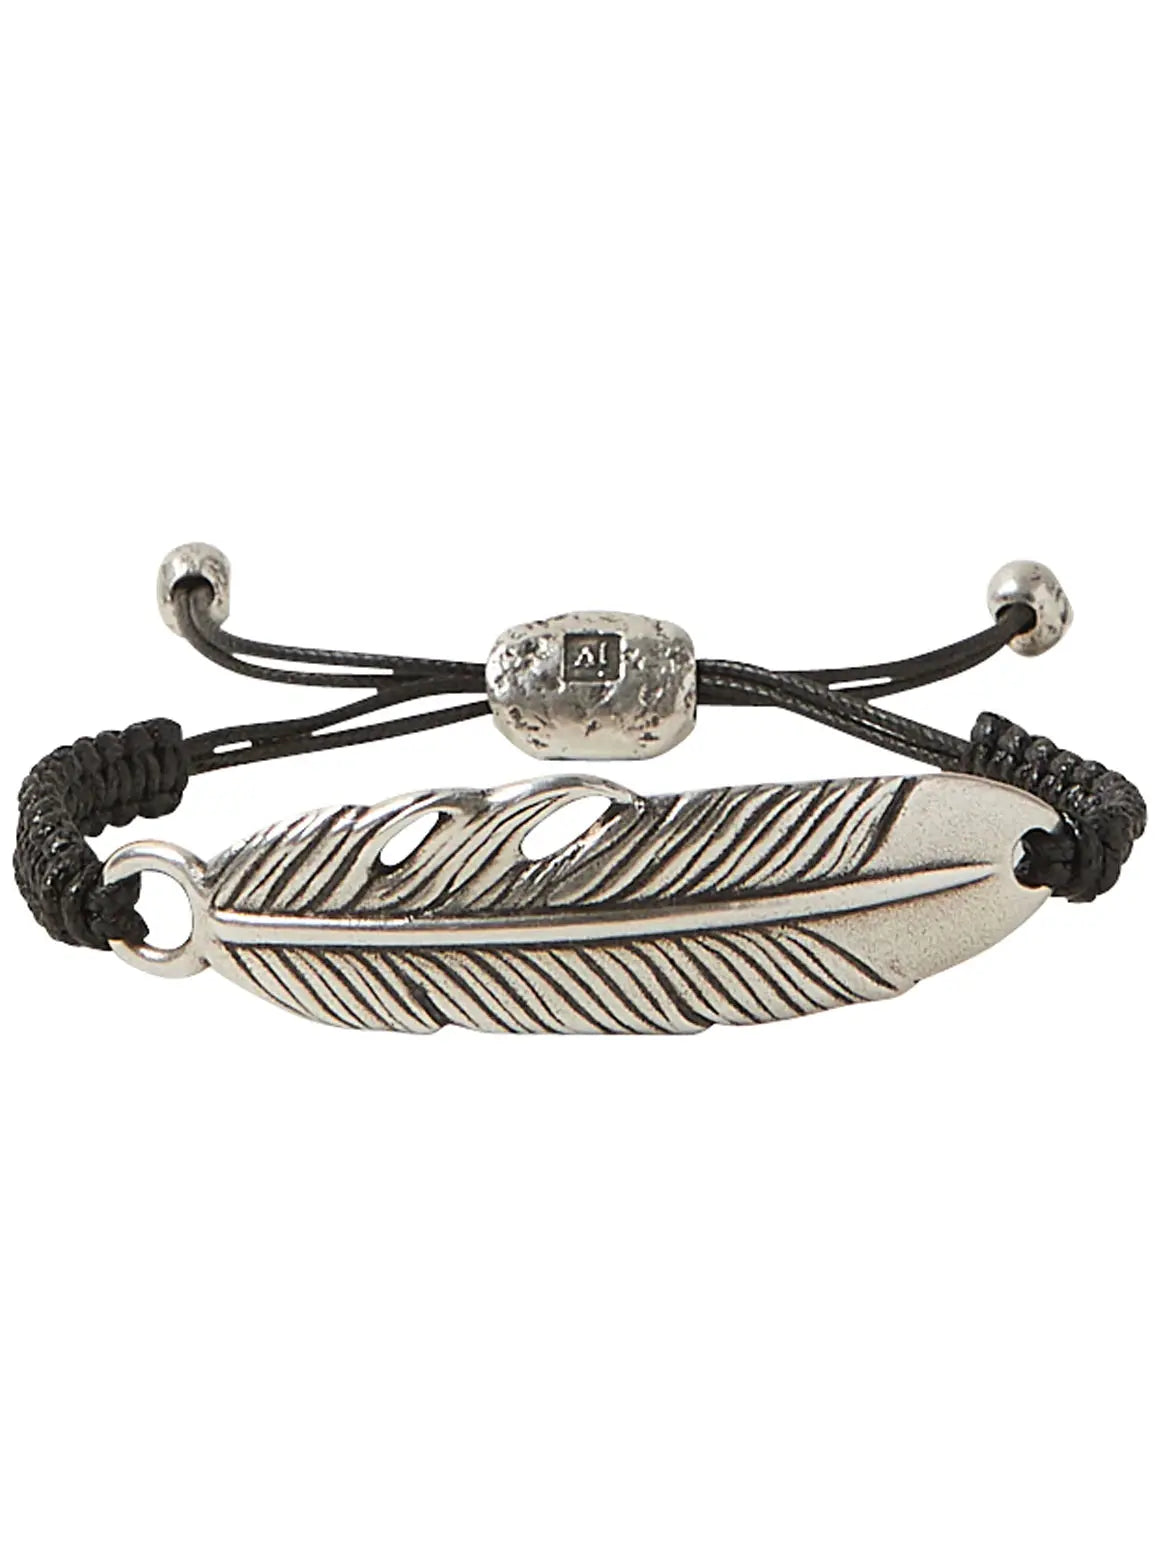 Raven Sterling Silver ID Bracelet with Feather, with No Stone  ID Bracelet in Sterling Silver, Feather, from the Raven Collection 10 inches  Designed by John Varvatos